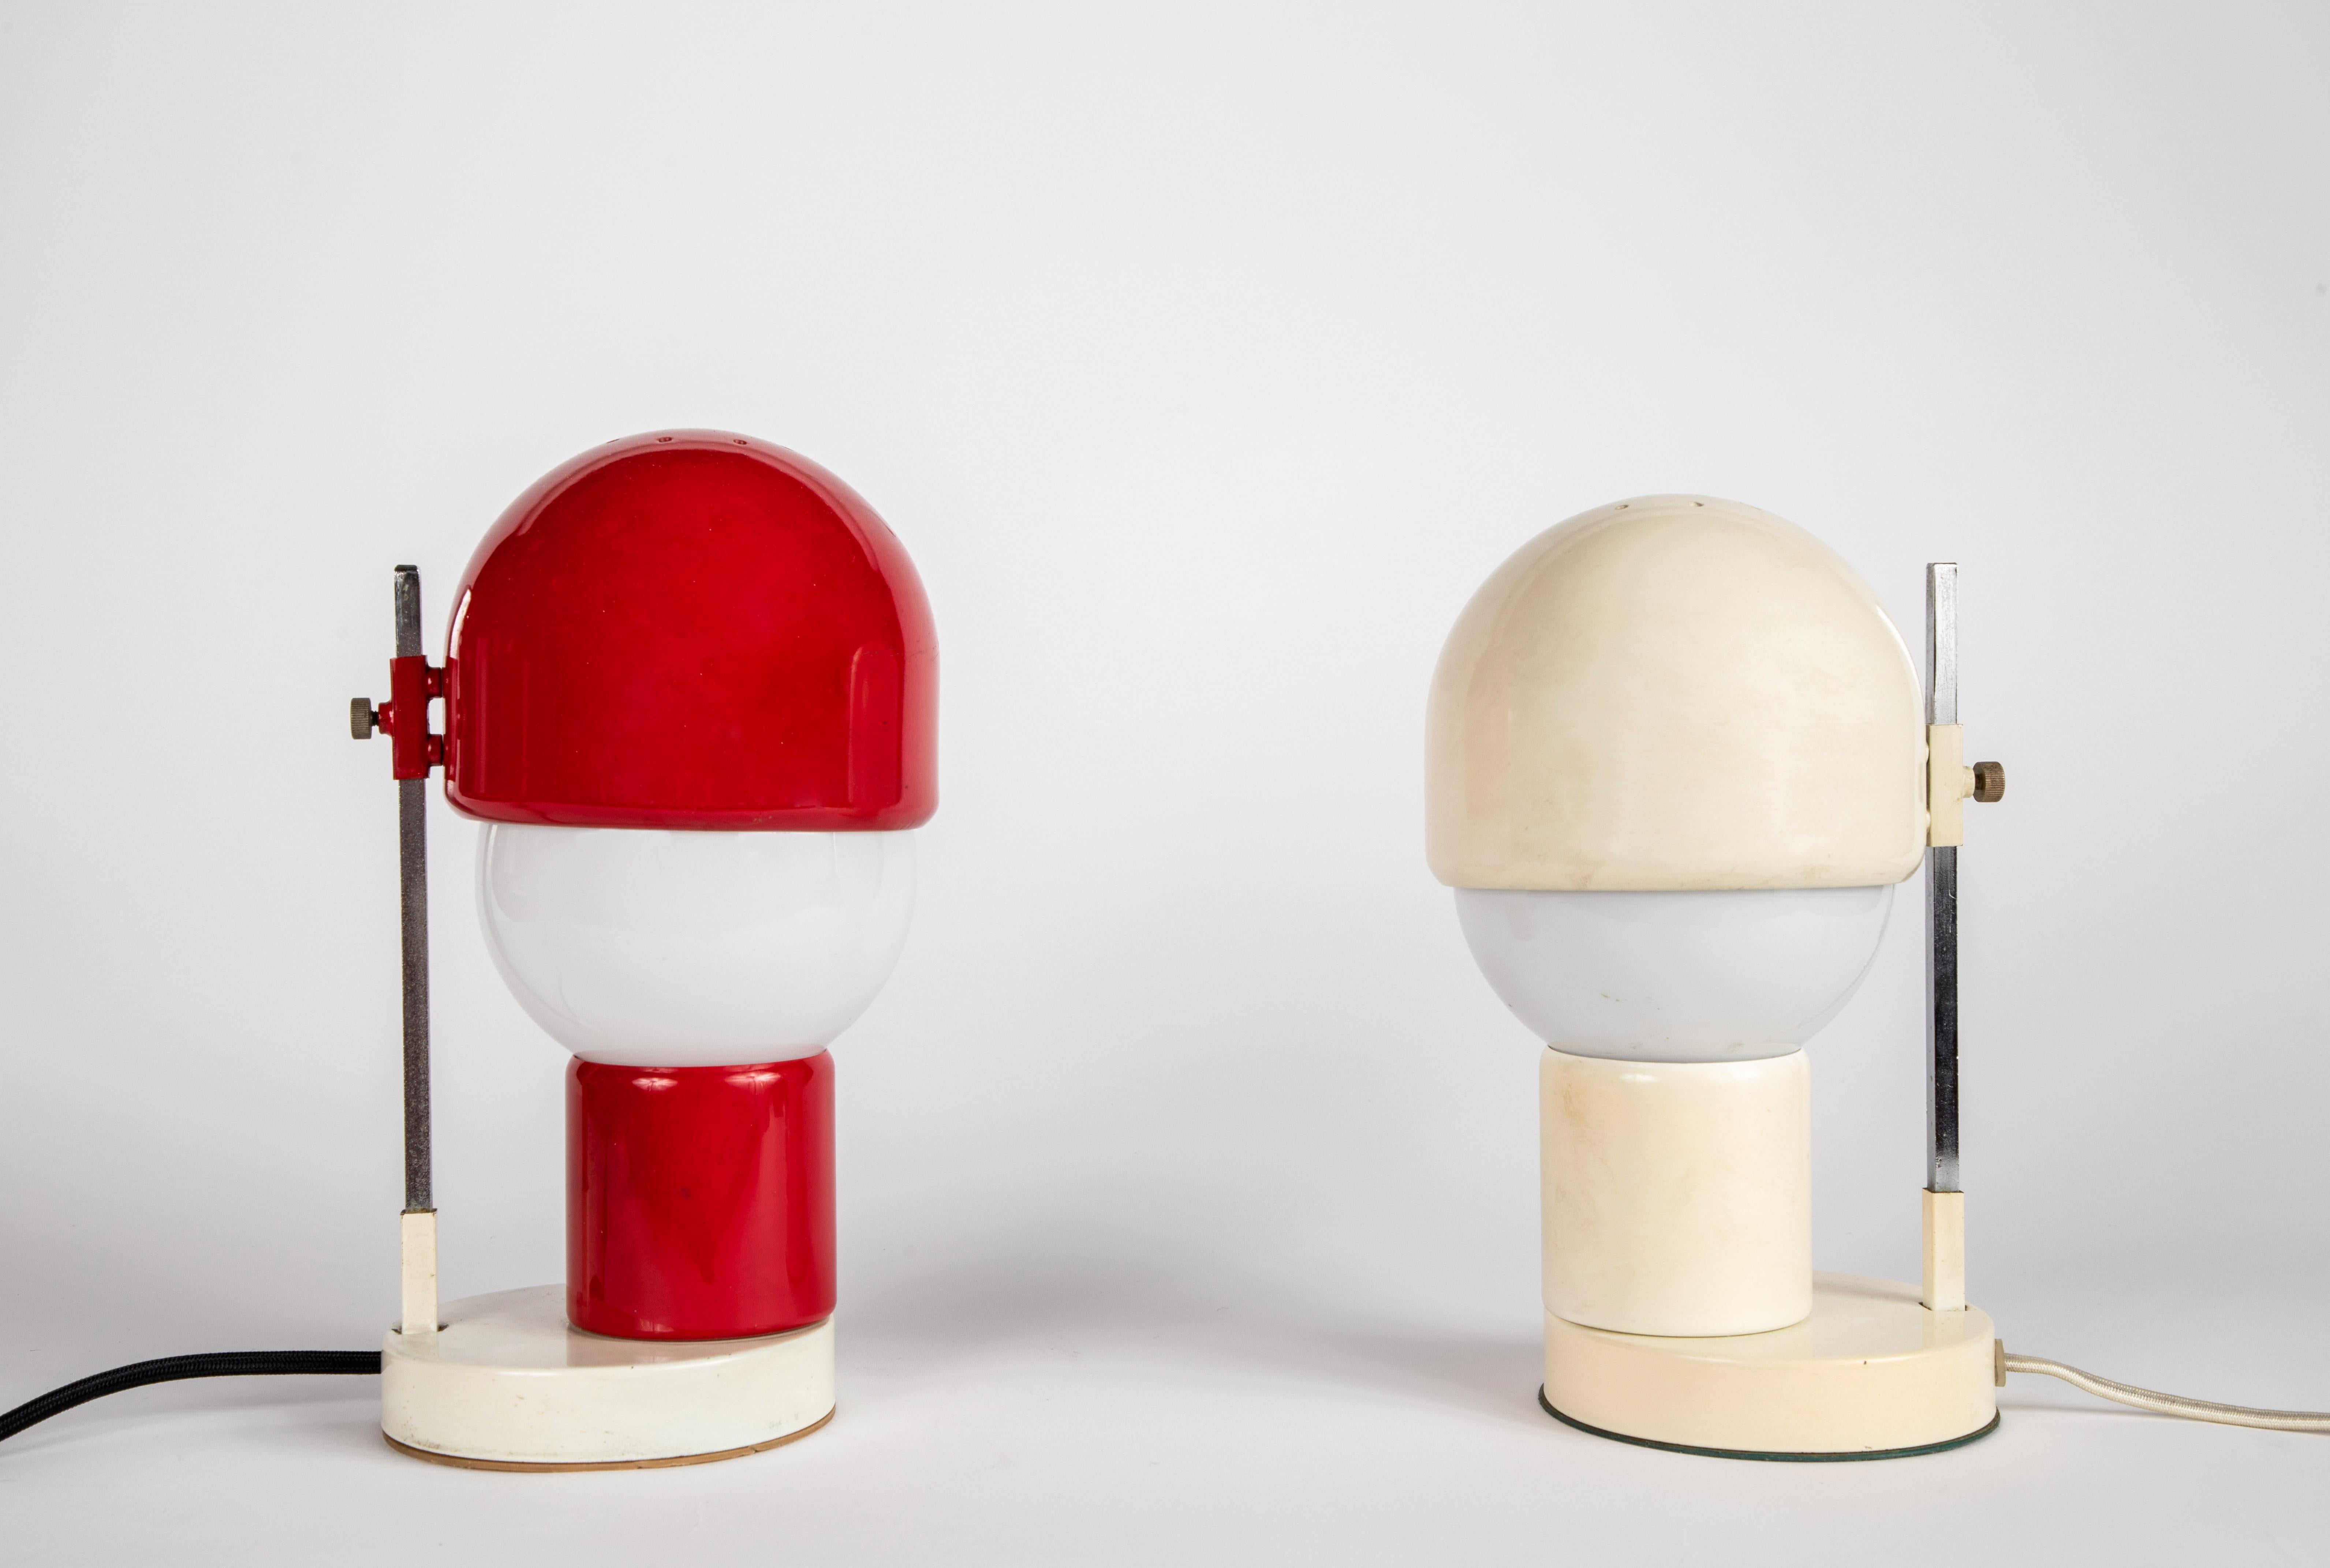 Pair of 1960s glass and metal table lamps attributed to Angelo Lelli for Arredoluce. A refined design executed in red and white painted metal, nickel and blown opaline glass. An exquisite set highly indicative of the iconic later work of Lelli and